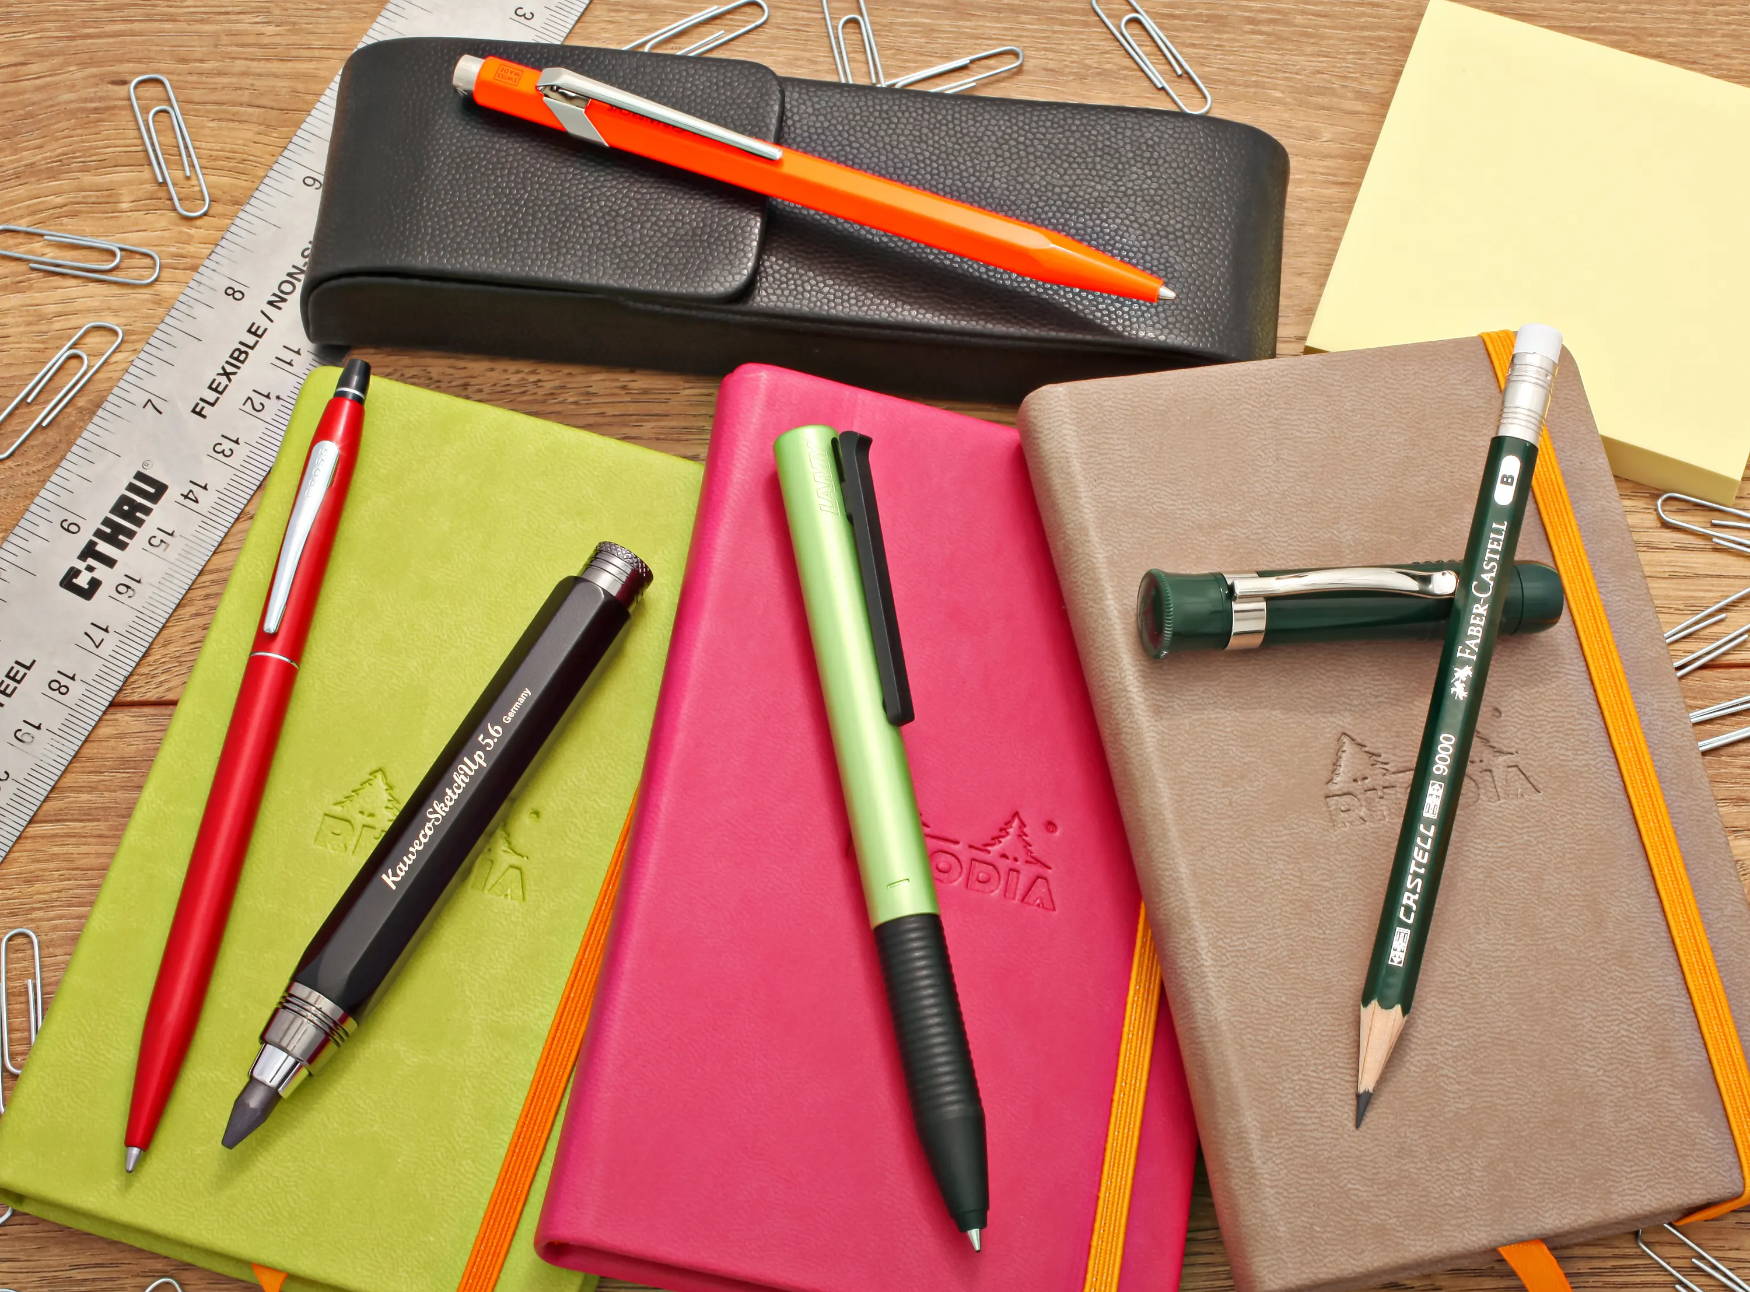 A pack of our good pens on top of notebooks